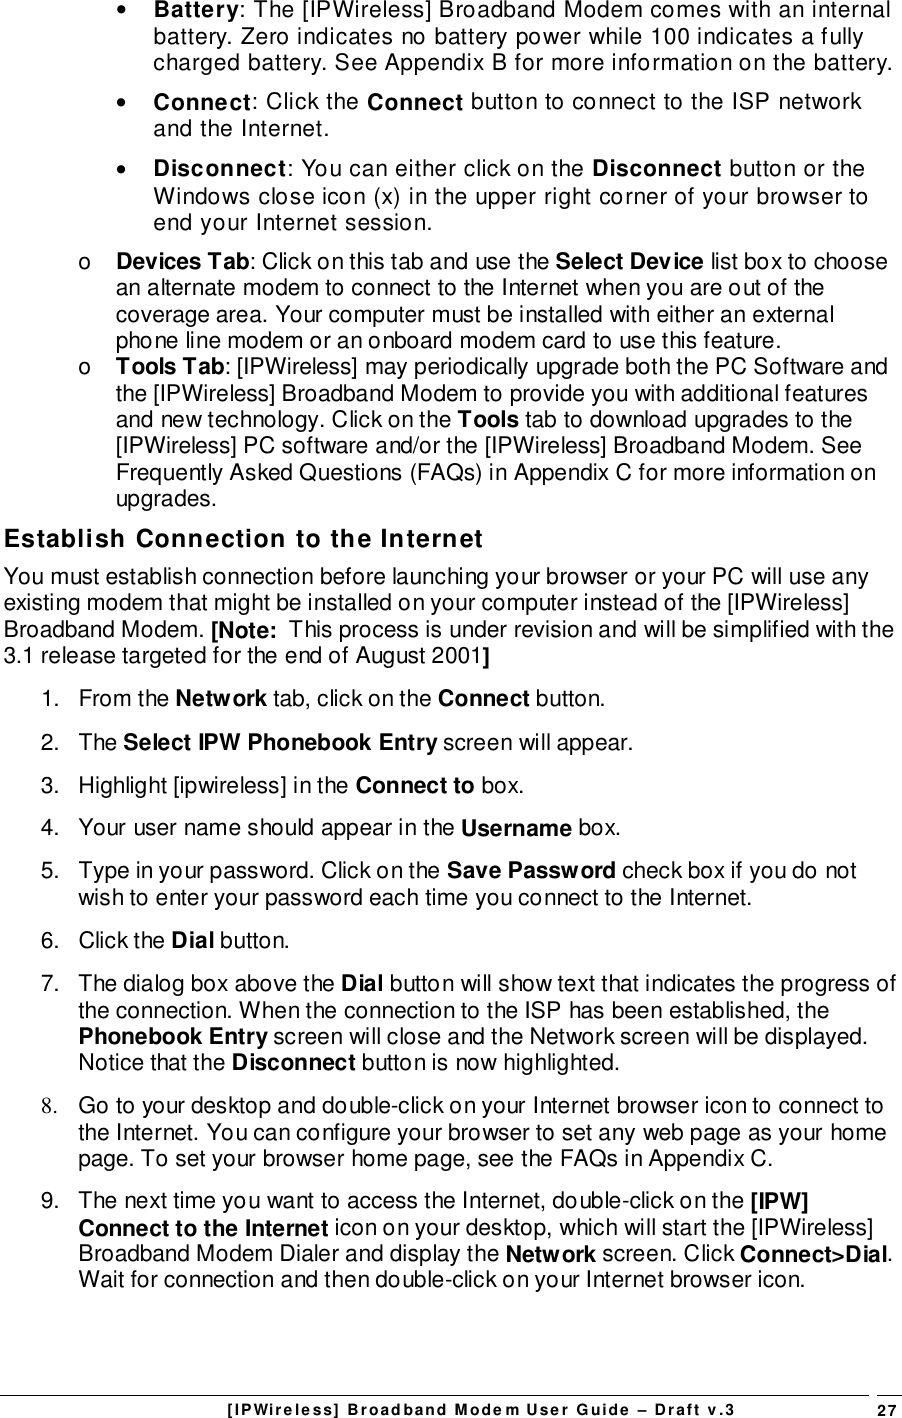 [IPWireless] Broadband Modem User Guide – Draft v.3 27• Battery: The [IPWireless] Broadband Modem comes with an internalbattery. Zero indicates no battery power while 100 indicates a fullycharged battery. See Appendix B for more information on the battery.• Connect: Click the Connect button to connect to the ISP networkand the Internet.• Disconnect: You can either click on the Disconnect button or theWindows close icon (x) in the upper right corner of your browser toend your Internet session.o  Devices Tab: Click on this tab and use the Select Device list box to choosean alternate modem to connect to the Internet when you are out of thecoverage area. Your computer must be installed with either an externalphone line modem or an onboard modem card to use this feature.o  Tools Tab: [IPWireless] may periodically upgrade both the PC Software andthe [IPWireless] Broadband Modem to provide you with additional featuresand new technology. Click on the Tools tab to download upgrades to the[IPWireless] PC software and/or the [IPWireless] Broadband Modem. SeeFrequently Asked Questions (FAQs) in Appendix C for more information onupgrades.Establish Connection to the InternetYou must establish connection before launching your browser or your PC will use anyexisting modem that might be installed on your computer instead of the [IPWireless]Broadband Modem. [Note:  This process is under revision and will be simplified with the3.1 release targeted for the end of August 2001]1. From the Network tab, click on the Connect button.2. The Select IPW Phonebook Entry screen will appear.3.  Highlight [ipwireless] in the Connect to box.4.  Your user name should appear in the Username box.5.  Type in your password. Click on the Save Password check box if you do notwish to enter your password each time you connect to the Internet.6. Click the Dial button.7.  The dialog box above the Dial button will show text that indicates the progress ofthe connection. When the connection to the ISP has been established, thePhonebook Entry screen will close and the Network screen will be displayed.Notice that the Disconnect button is now highlighted.8.  Go to your desktop and double-click on your Internet browser icon to connect tothe Internet. You can configure your browser to set any web page as your homepage. To set your browser home page, see the FAQs in Appendix C.9.  The next time you want to access the Internet, double-click on the [IPW]Connect to the Internet icon on your desktop, which will start the [IPWireless]Broadband Modem Dialer and display the Network screen. Click Connect&gt;Dial.Wait for connection and then double-click on your Internet browser icon.